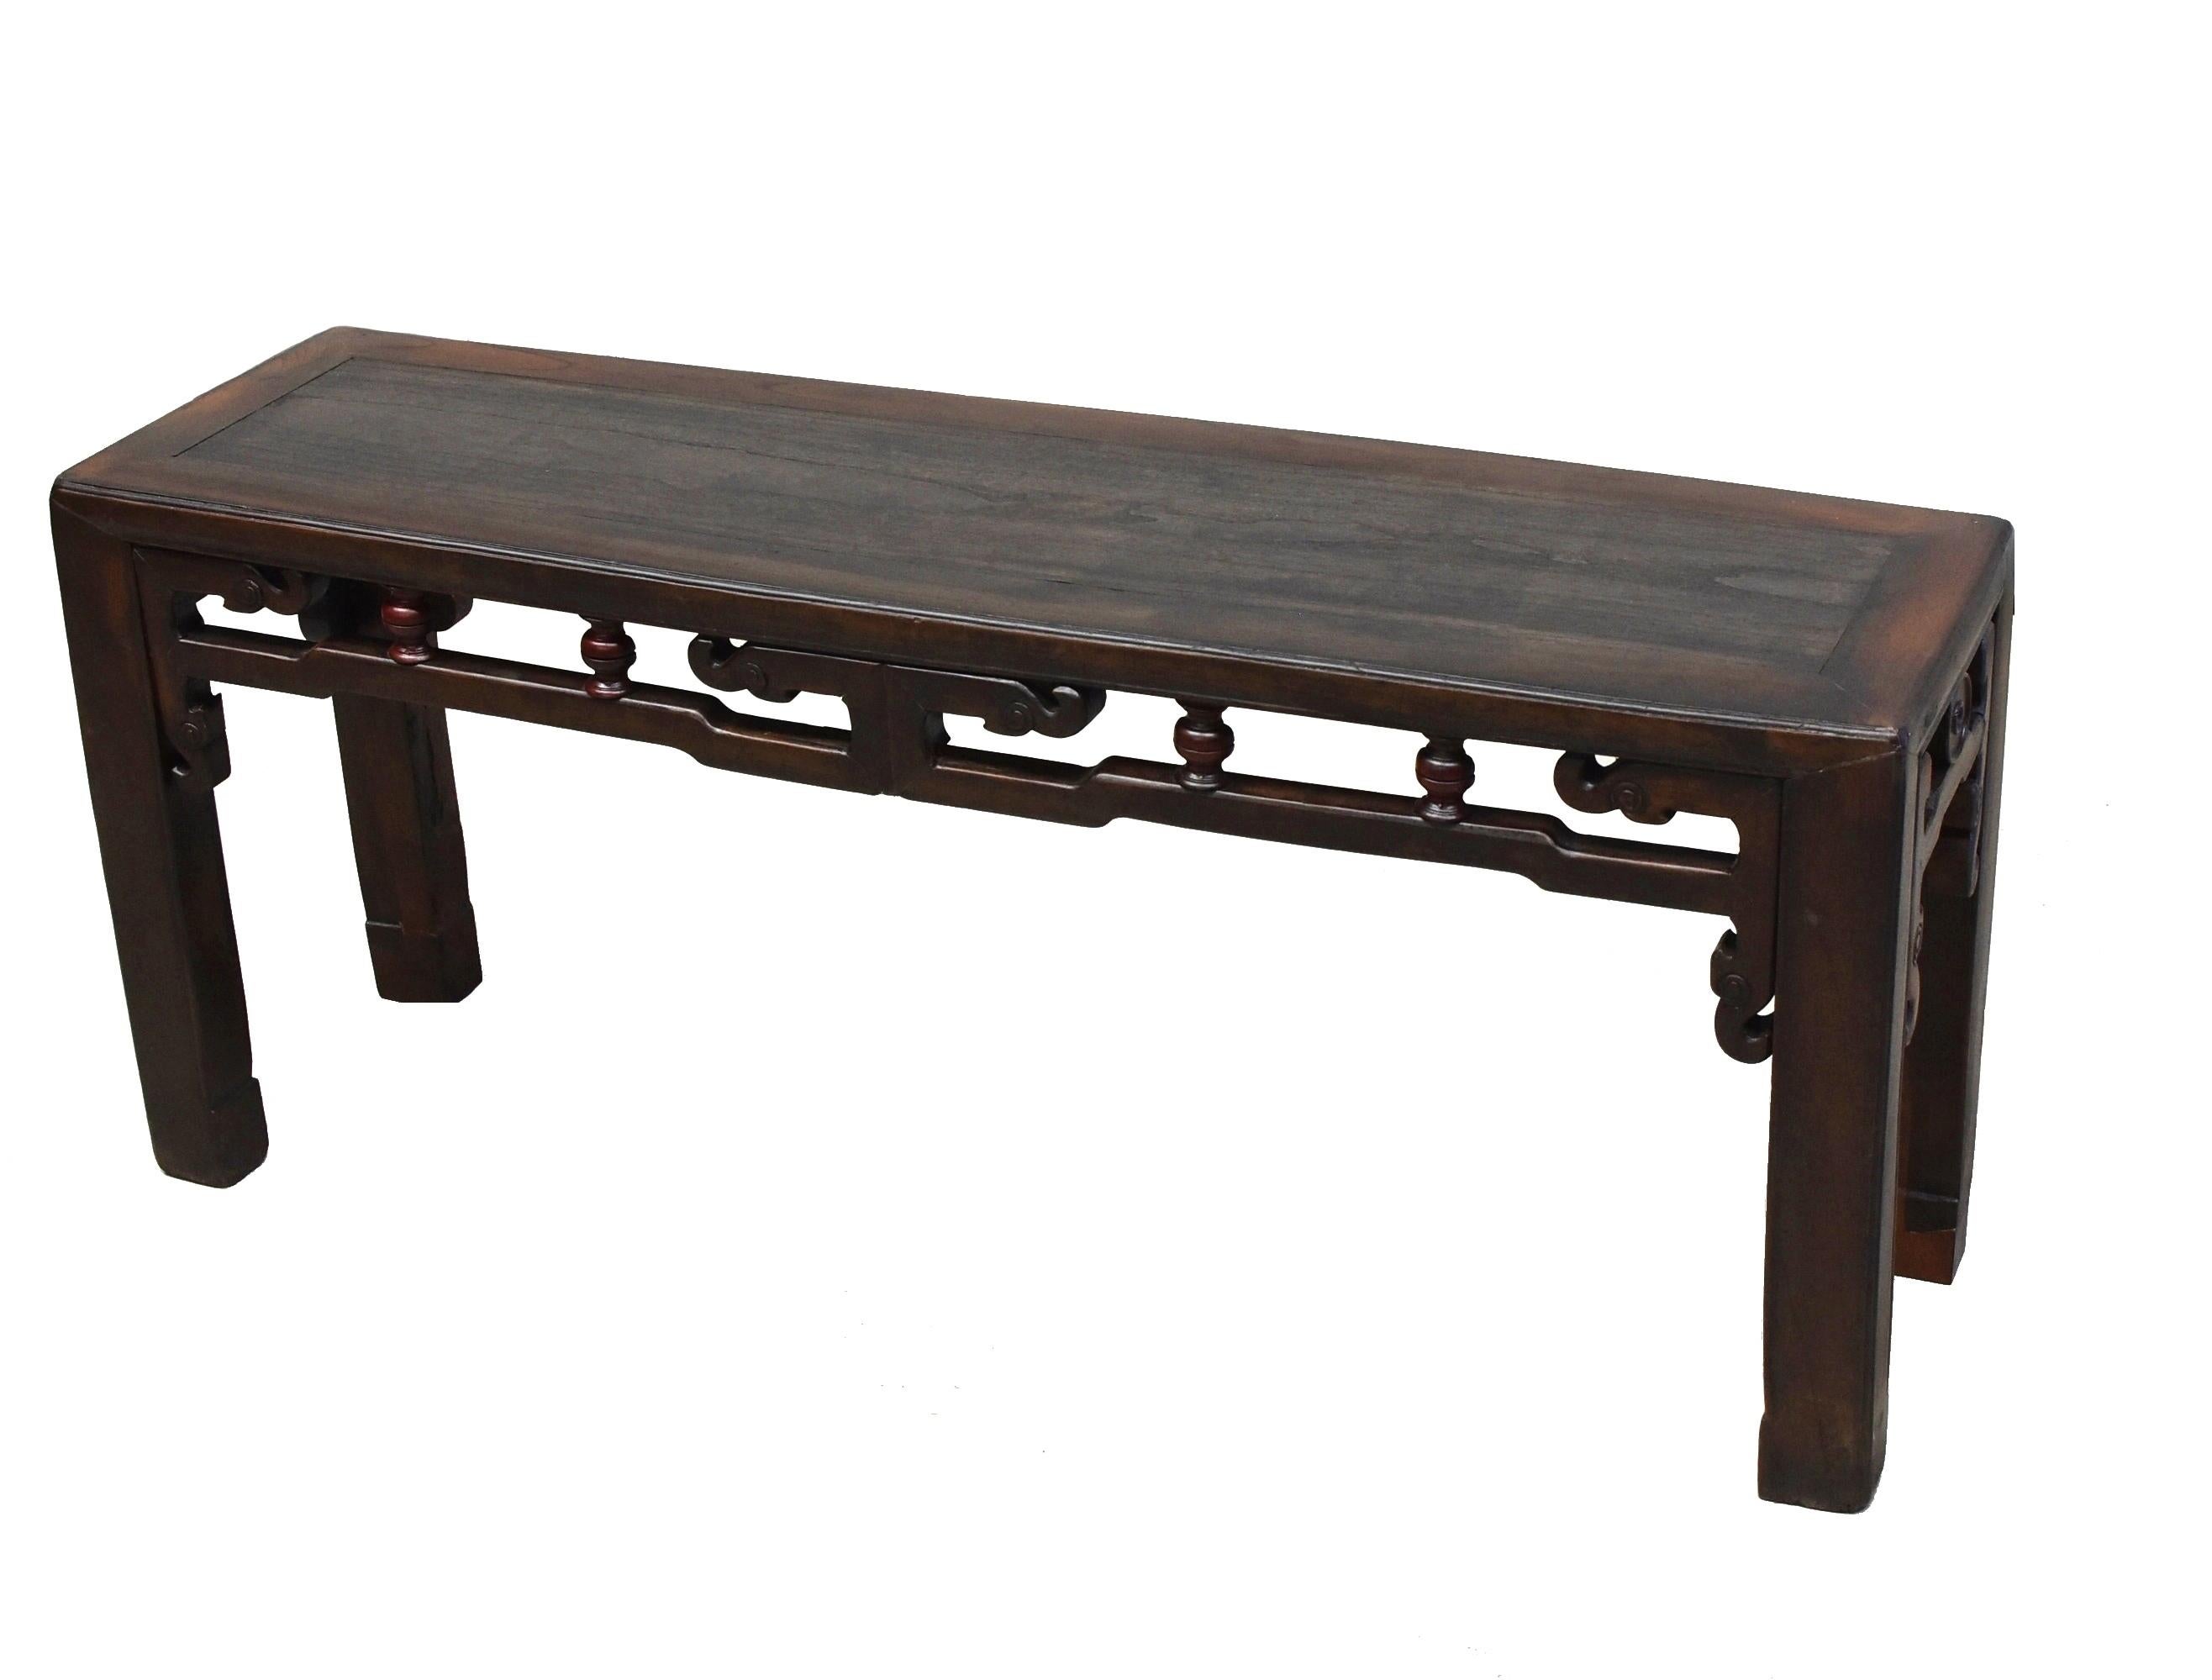 A solid wood antique Chinese spring bench. Such a bench was made in the region south of China's Yangtze river. It is sturdy and multi-functional, often used both as a seat and a table. The bench is finished on all sides, featuring the carved,